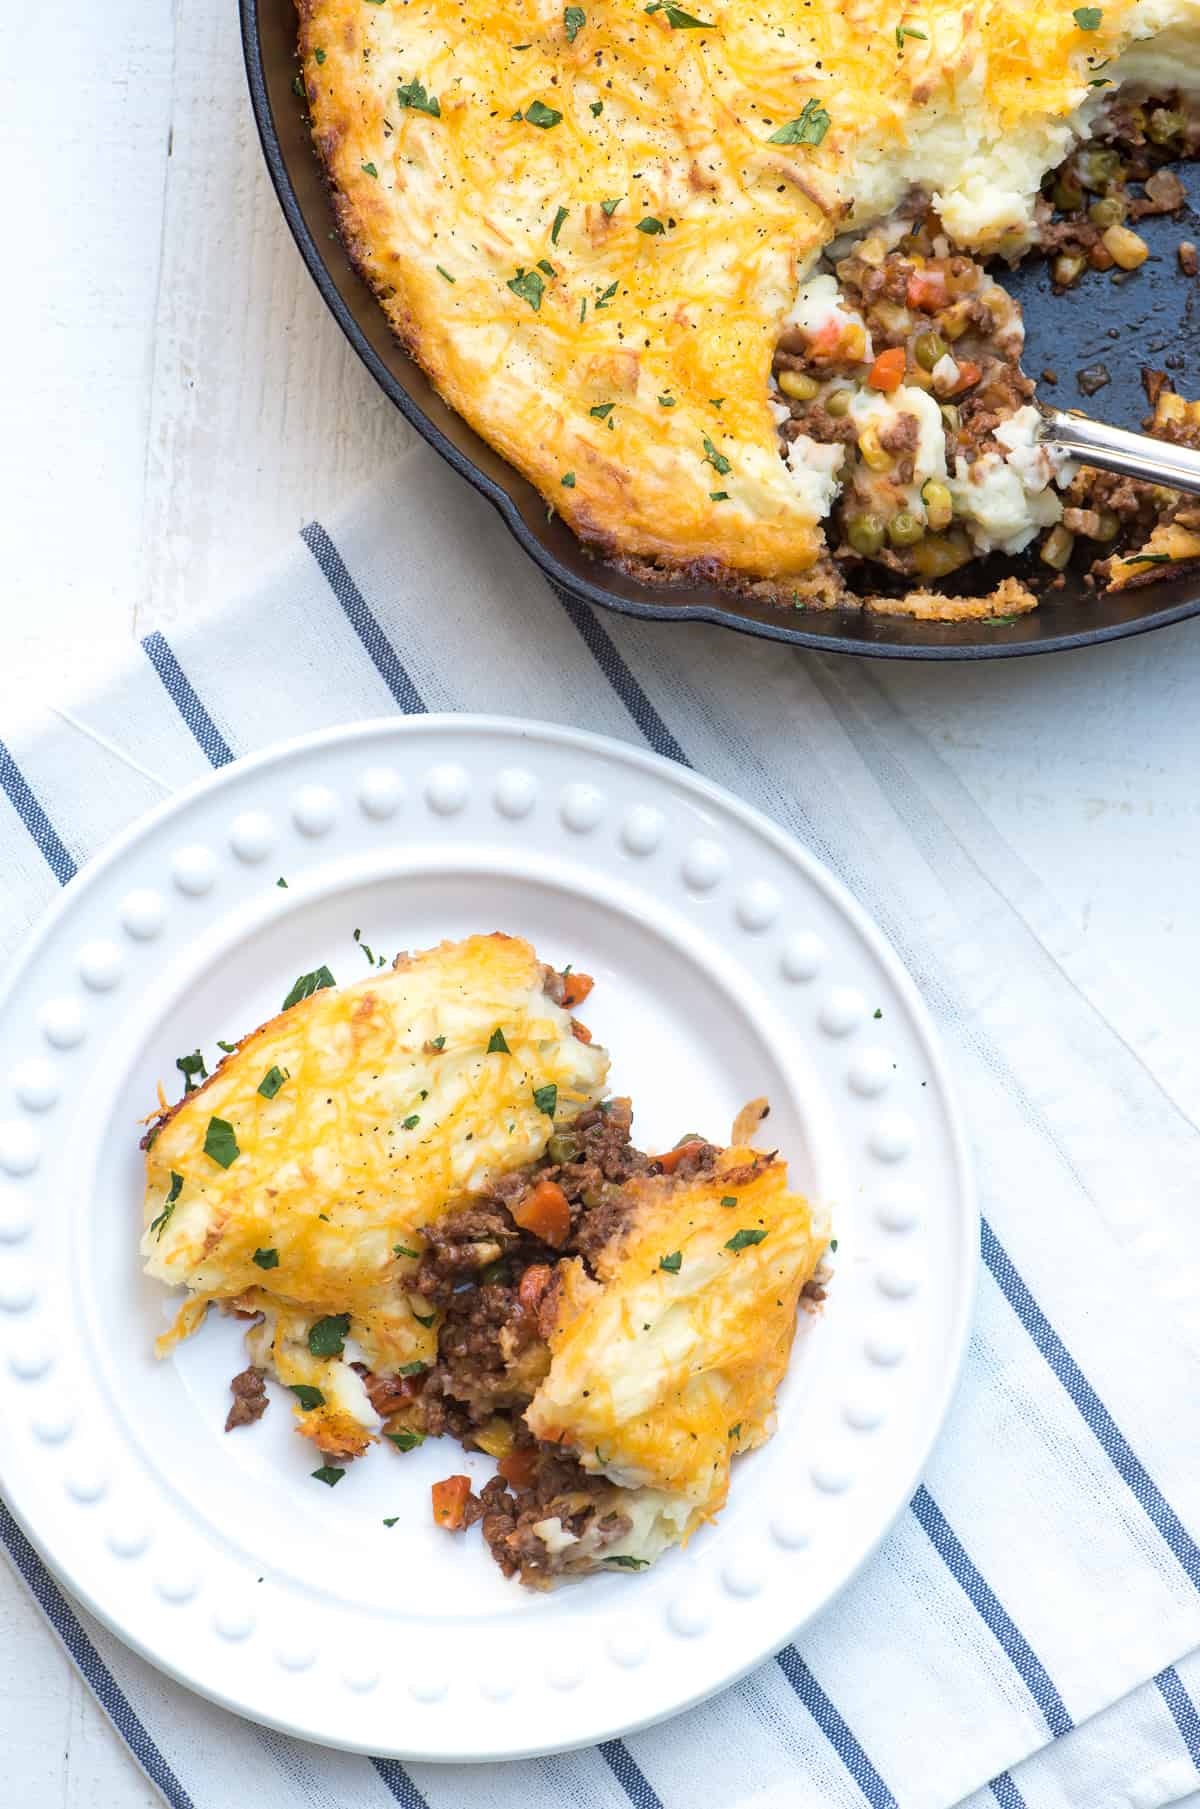 A serving of shepherd's pie on a white plate next to a cast iron skillet.